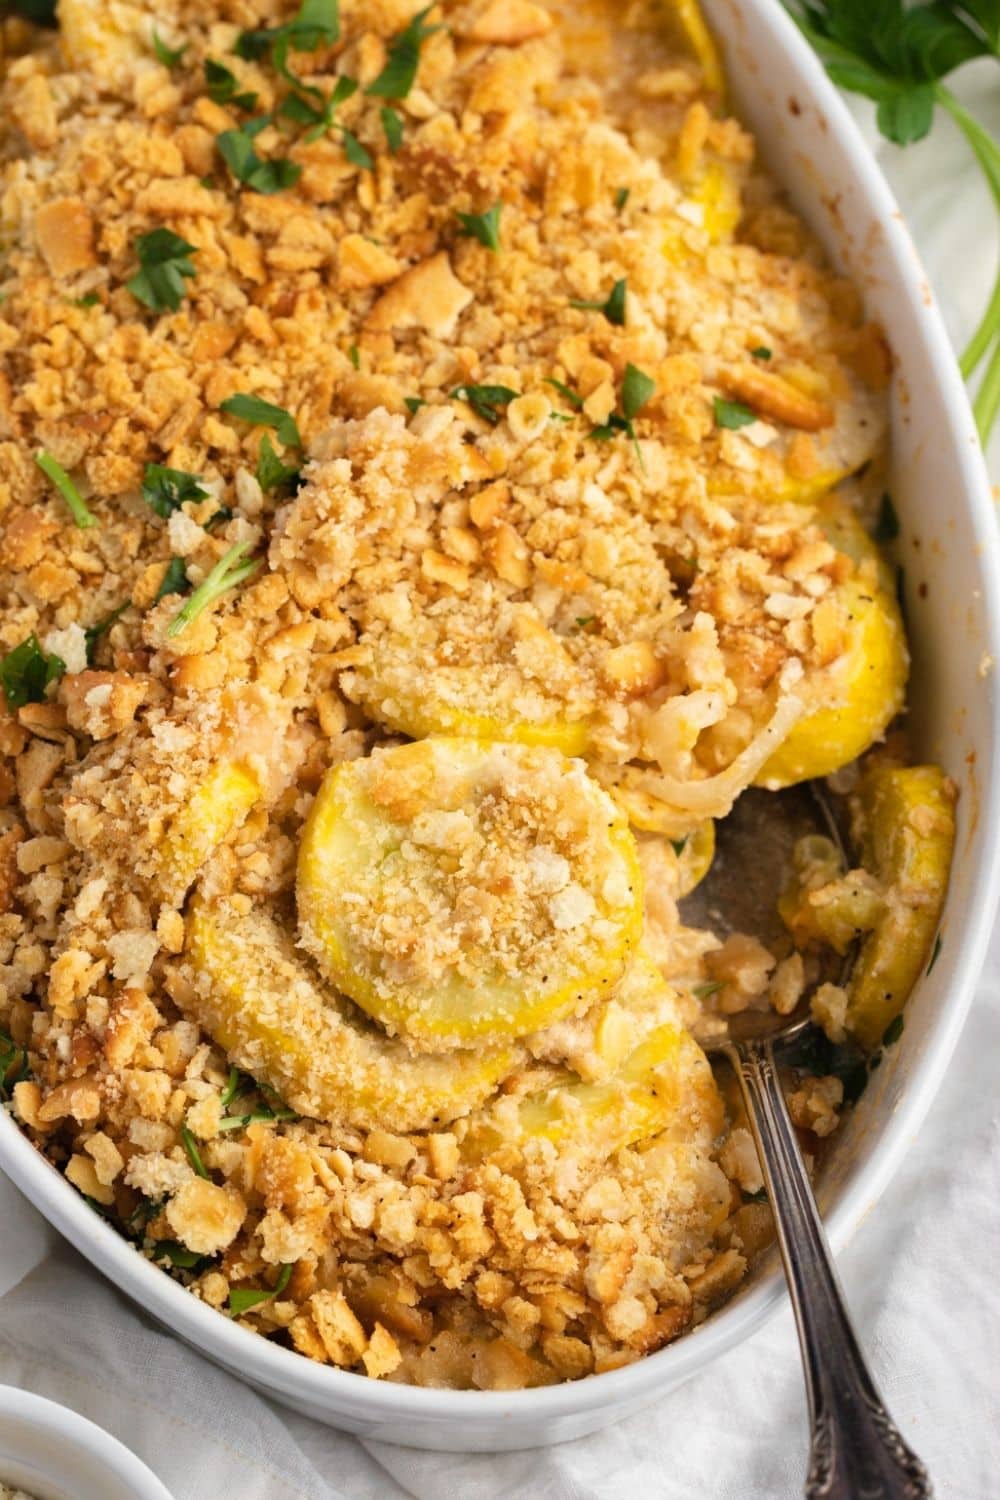 Paula Deen’s Squash Casserole Made With Rounded Cut Summer Squash and  Crushed Butter Crackers, Prepared on a Baking Dish With Spoon Dipped on It for Serving